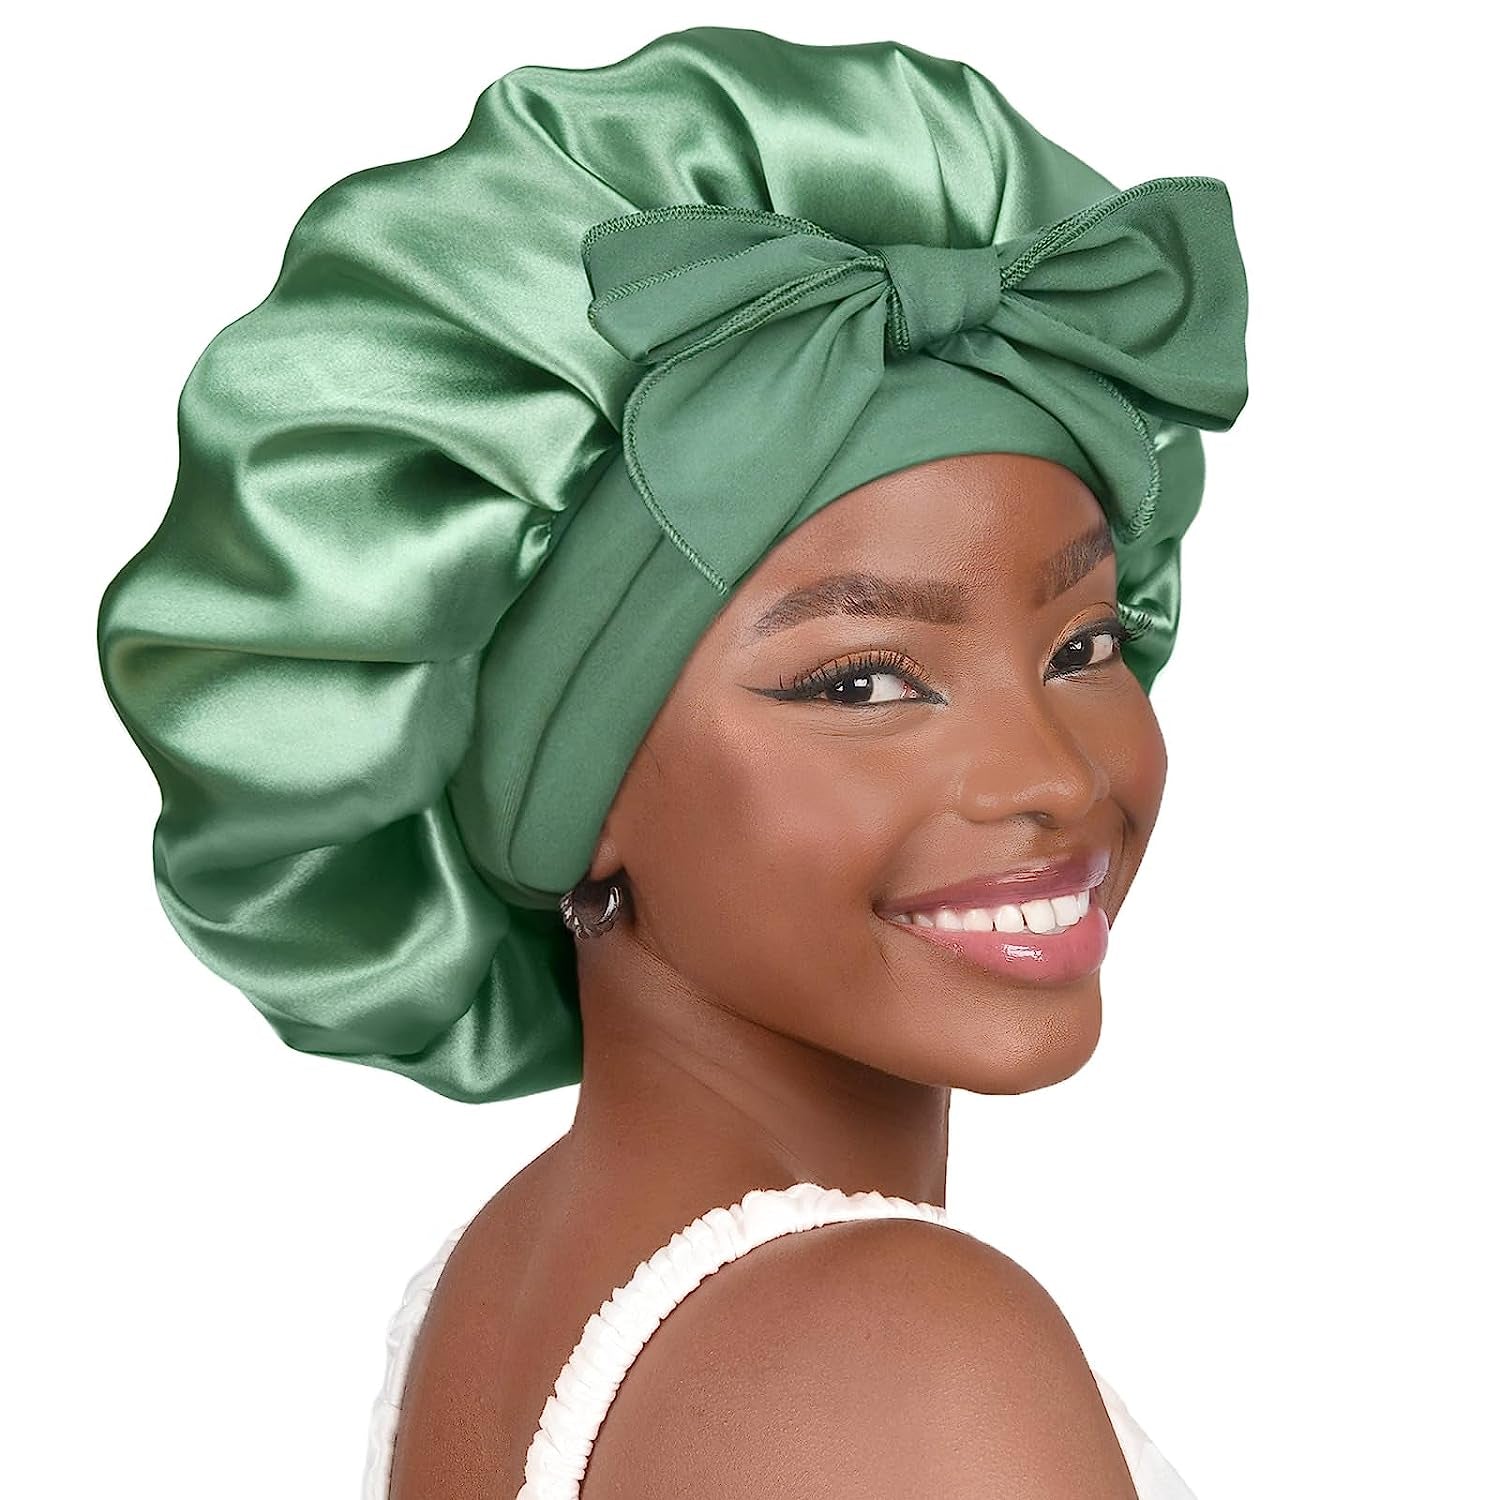 PHAMILY Satin Bonnet Silk Bonnet with Tie Band for  Sleeping, Double Layer Satin Lined, Black Hair Bonnets for Women Natural Curly Hair